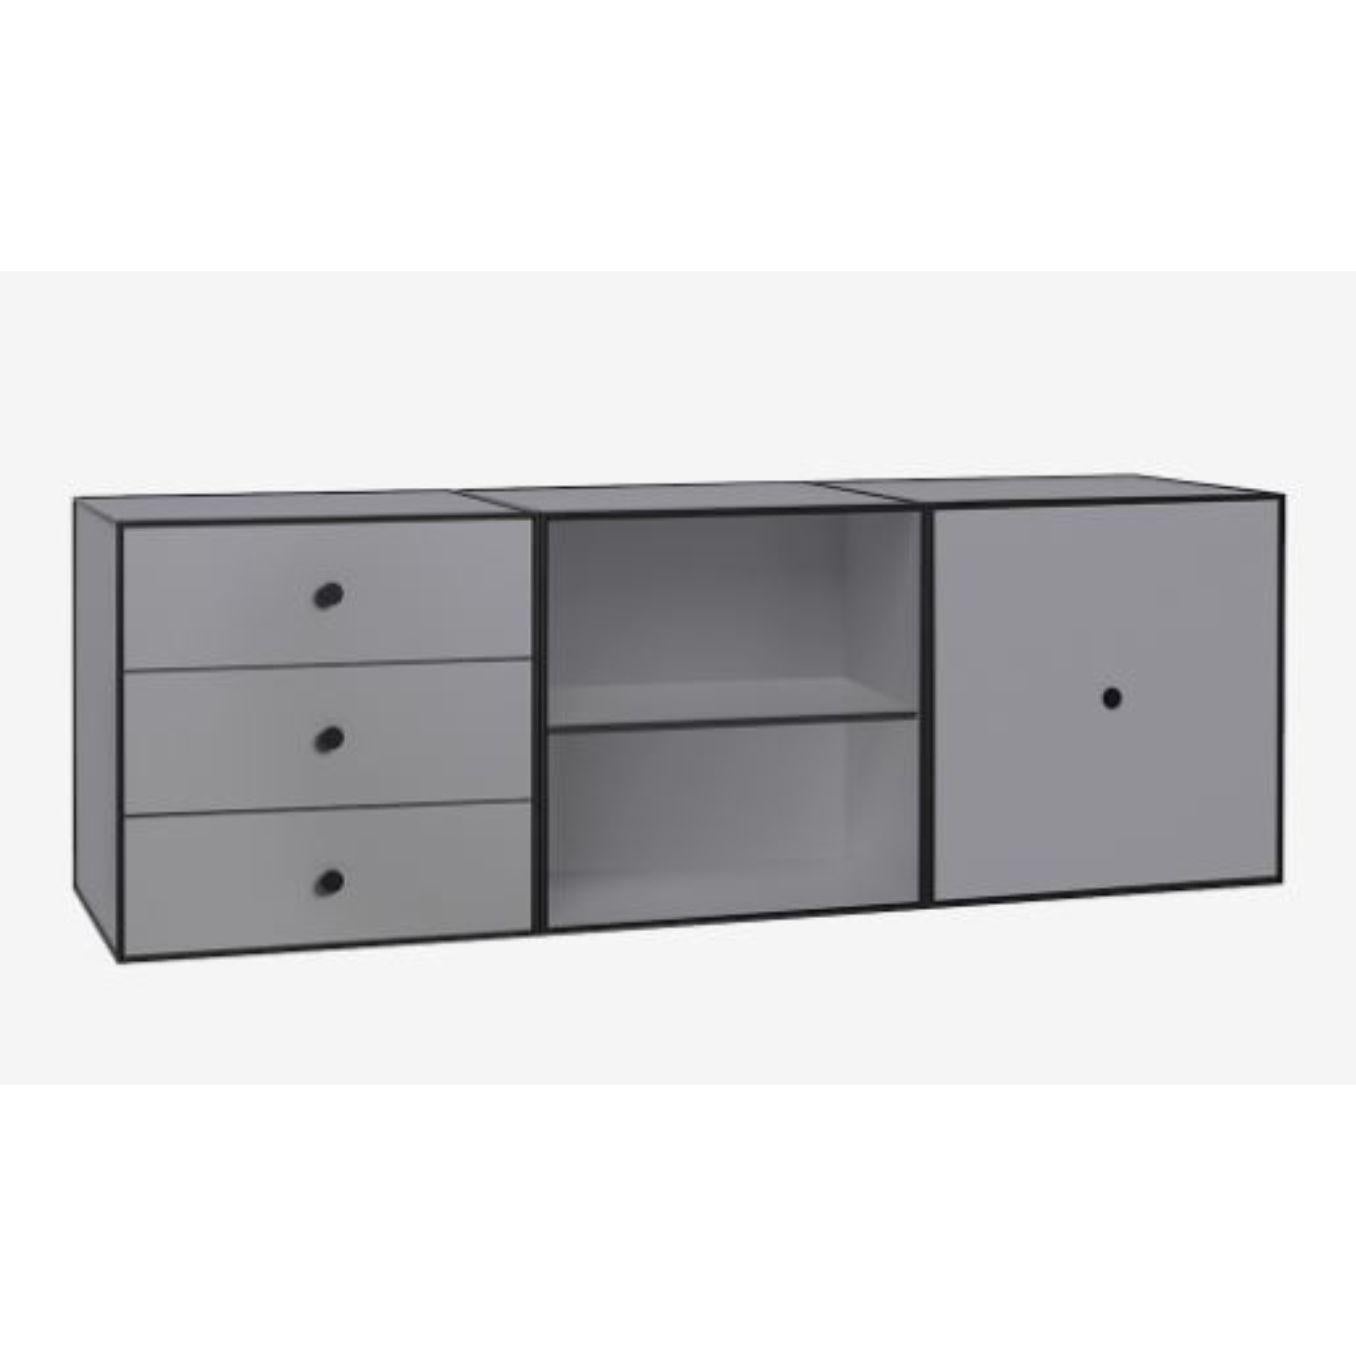 49 dark grey frame box trio by Lassen
Dimensions: D 147 x W 42 x H 49 cm 
Materials: Finér, Melamin, Melamine, Metal, Veneer
Also available in different colors and dimensions. 
Weight: 45 Kg

By Lassen is a Danish design brand focused on